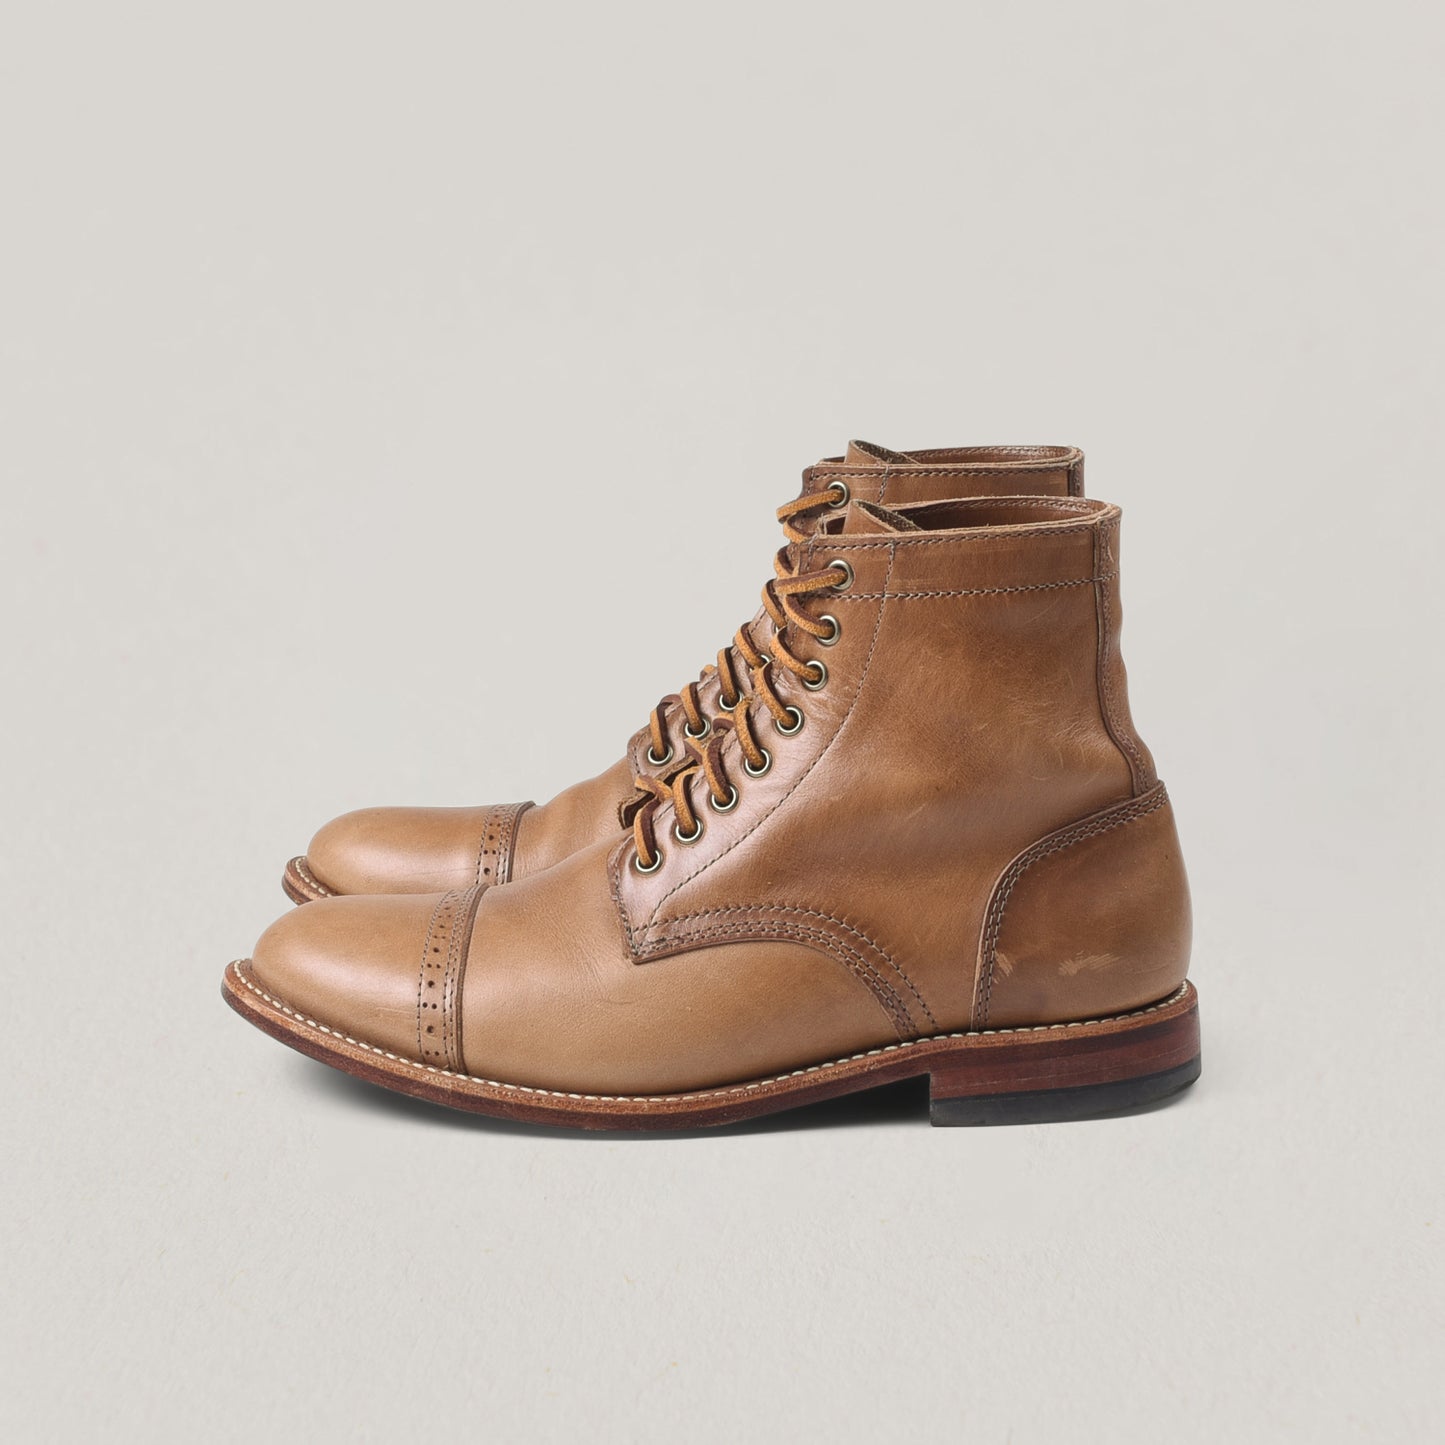 USED OAK STREET BOOTMAKERS CAP-TOE TRENCH BOOT - NATURAL CHROMEXCEL